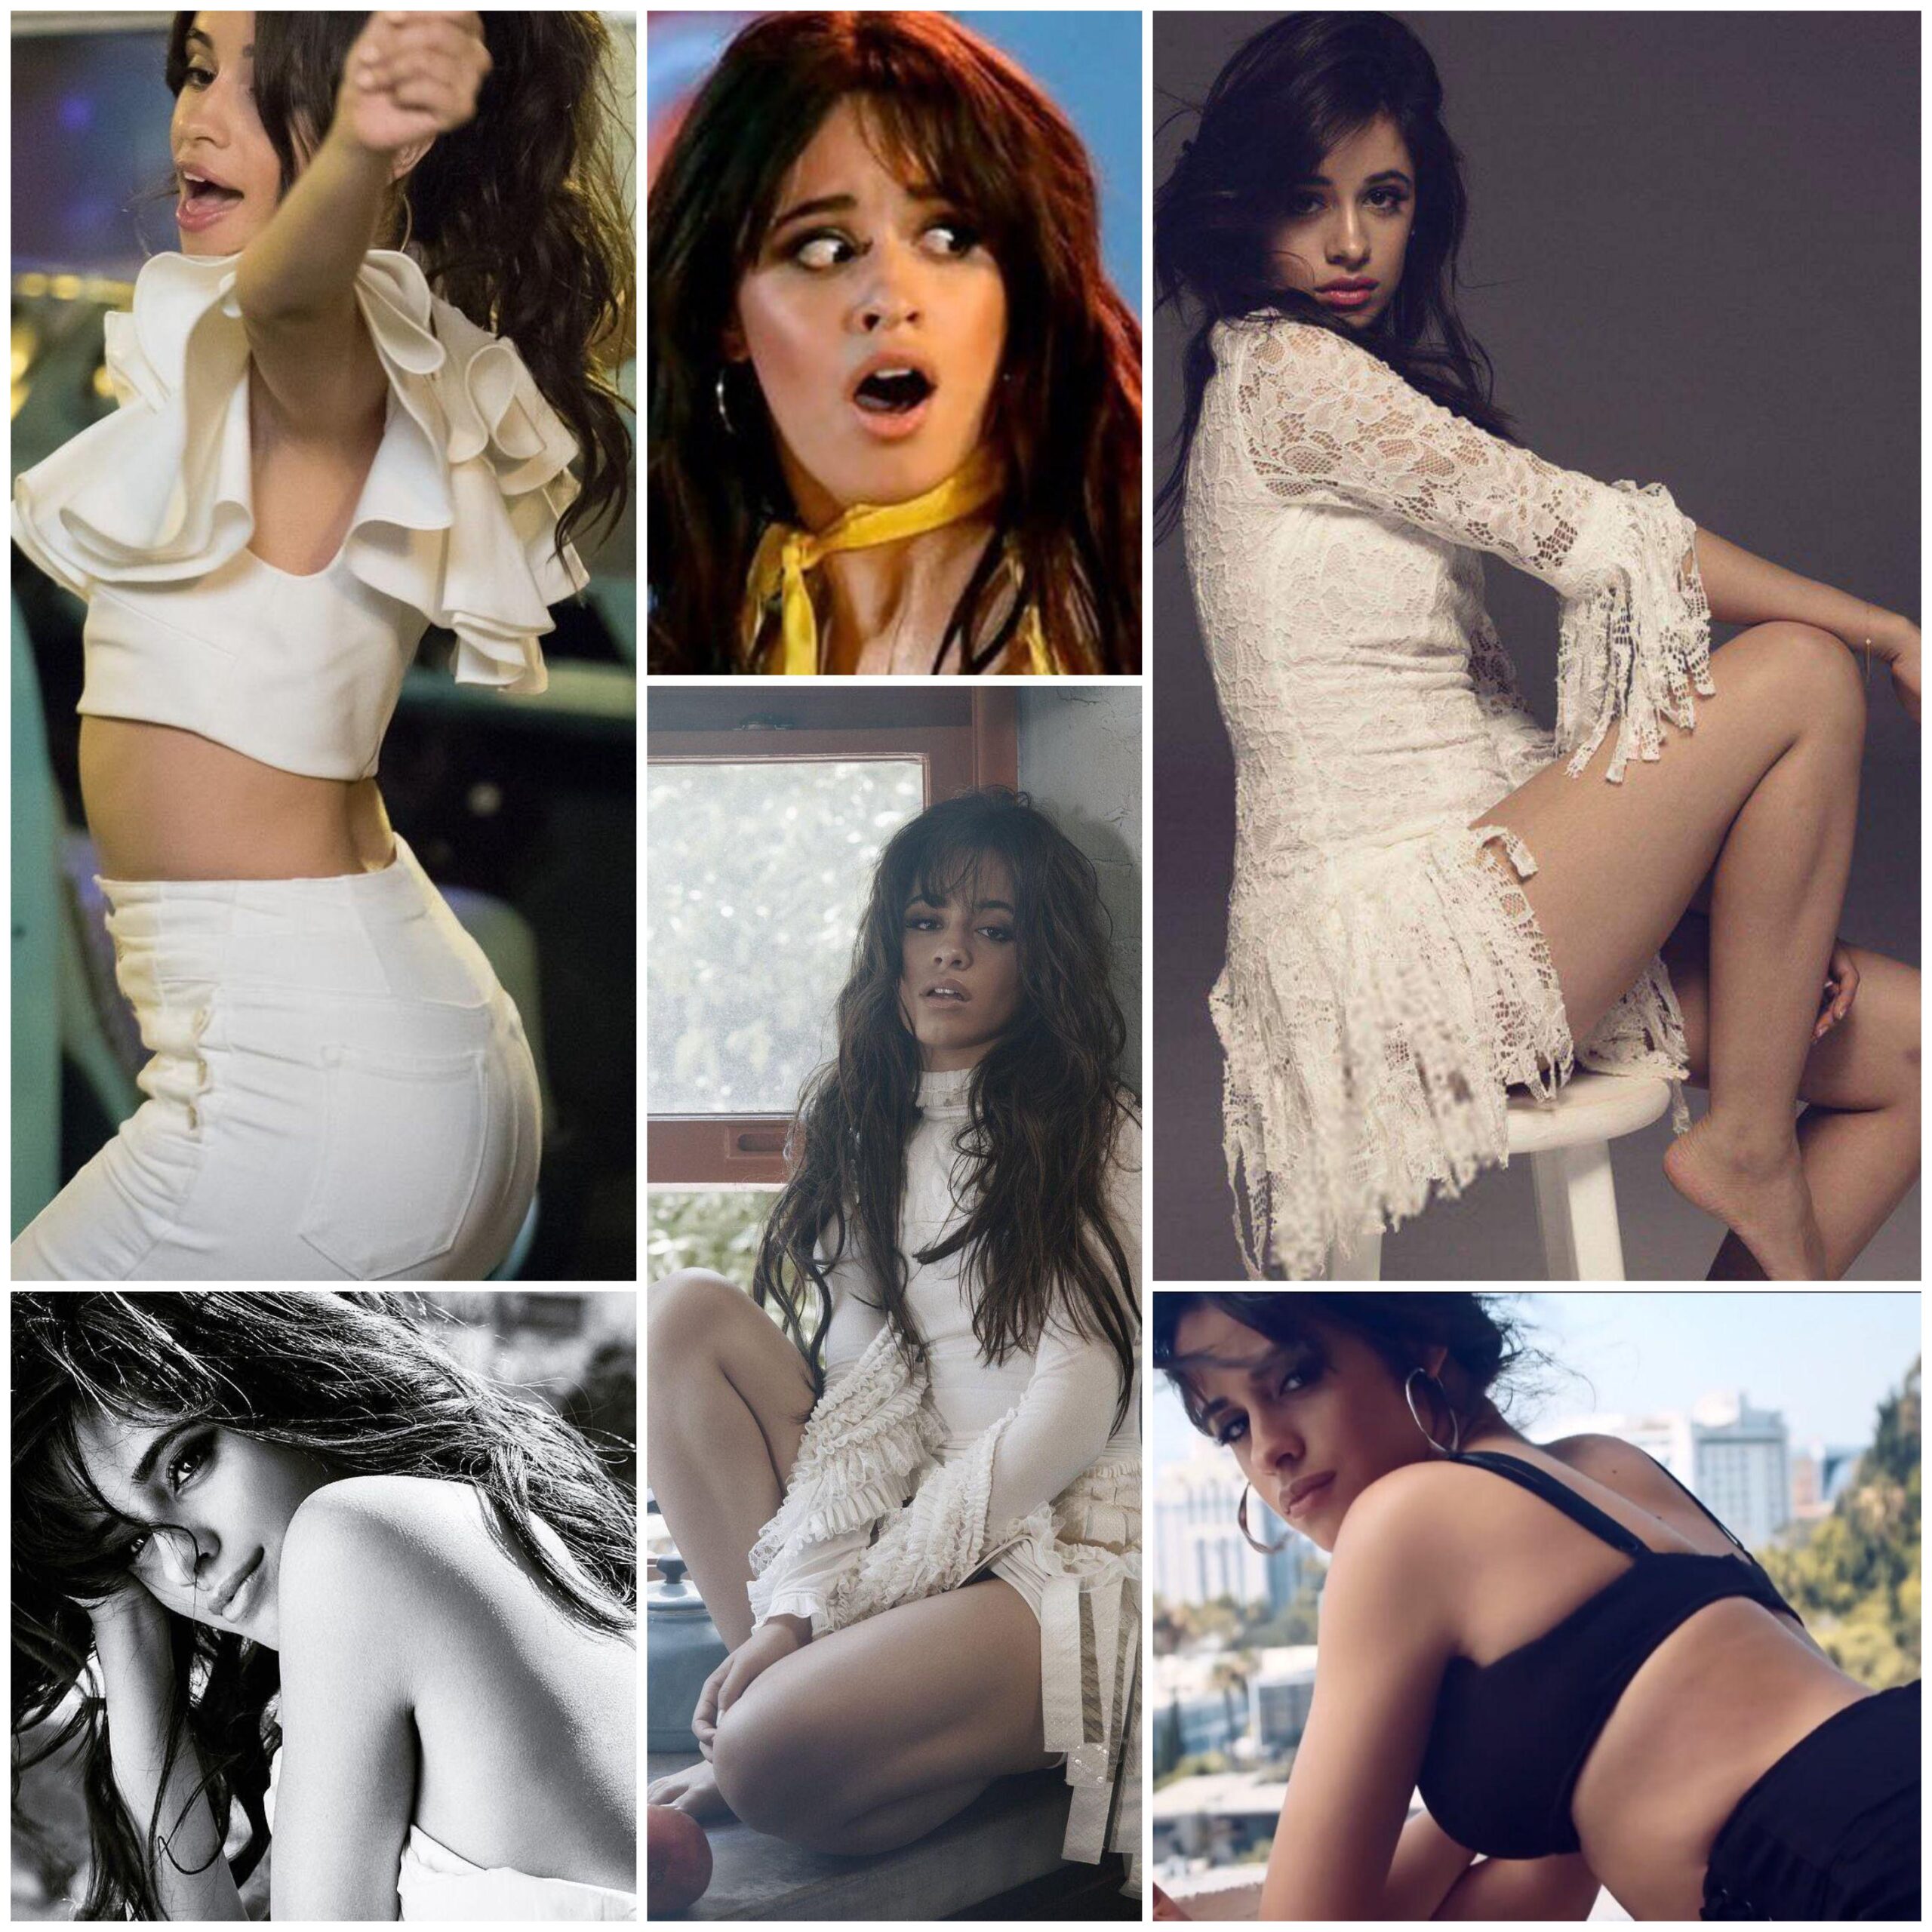 Camila Cabello would absolutely get it